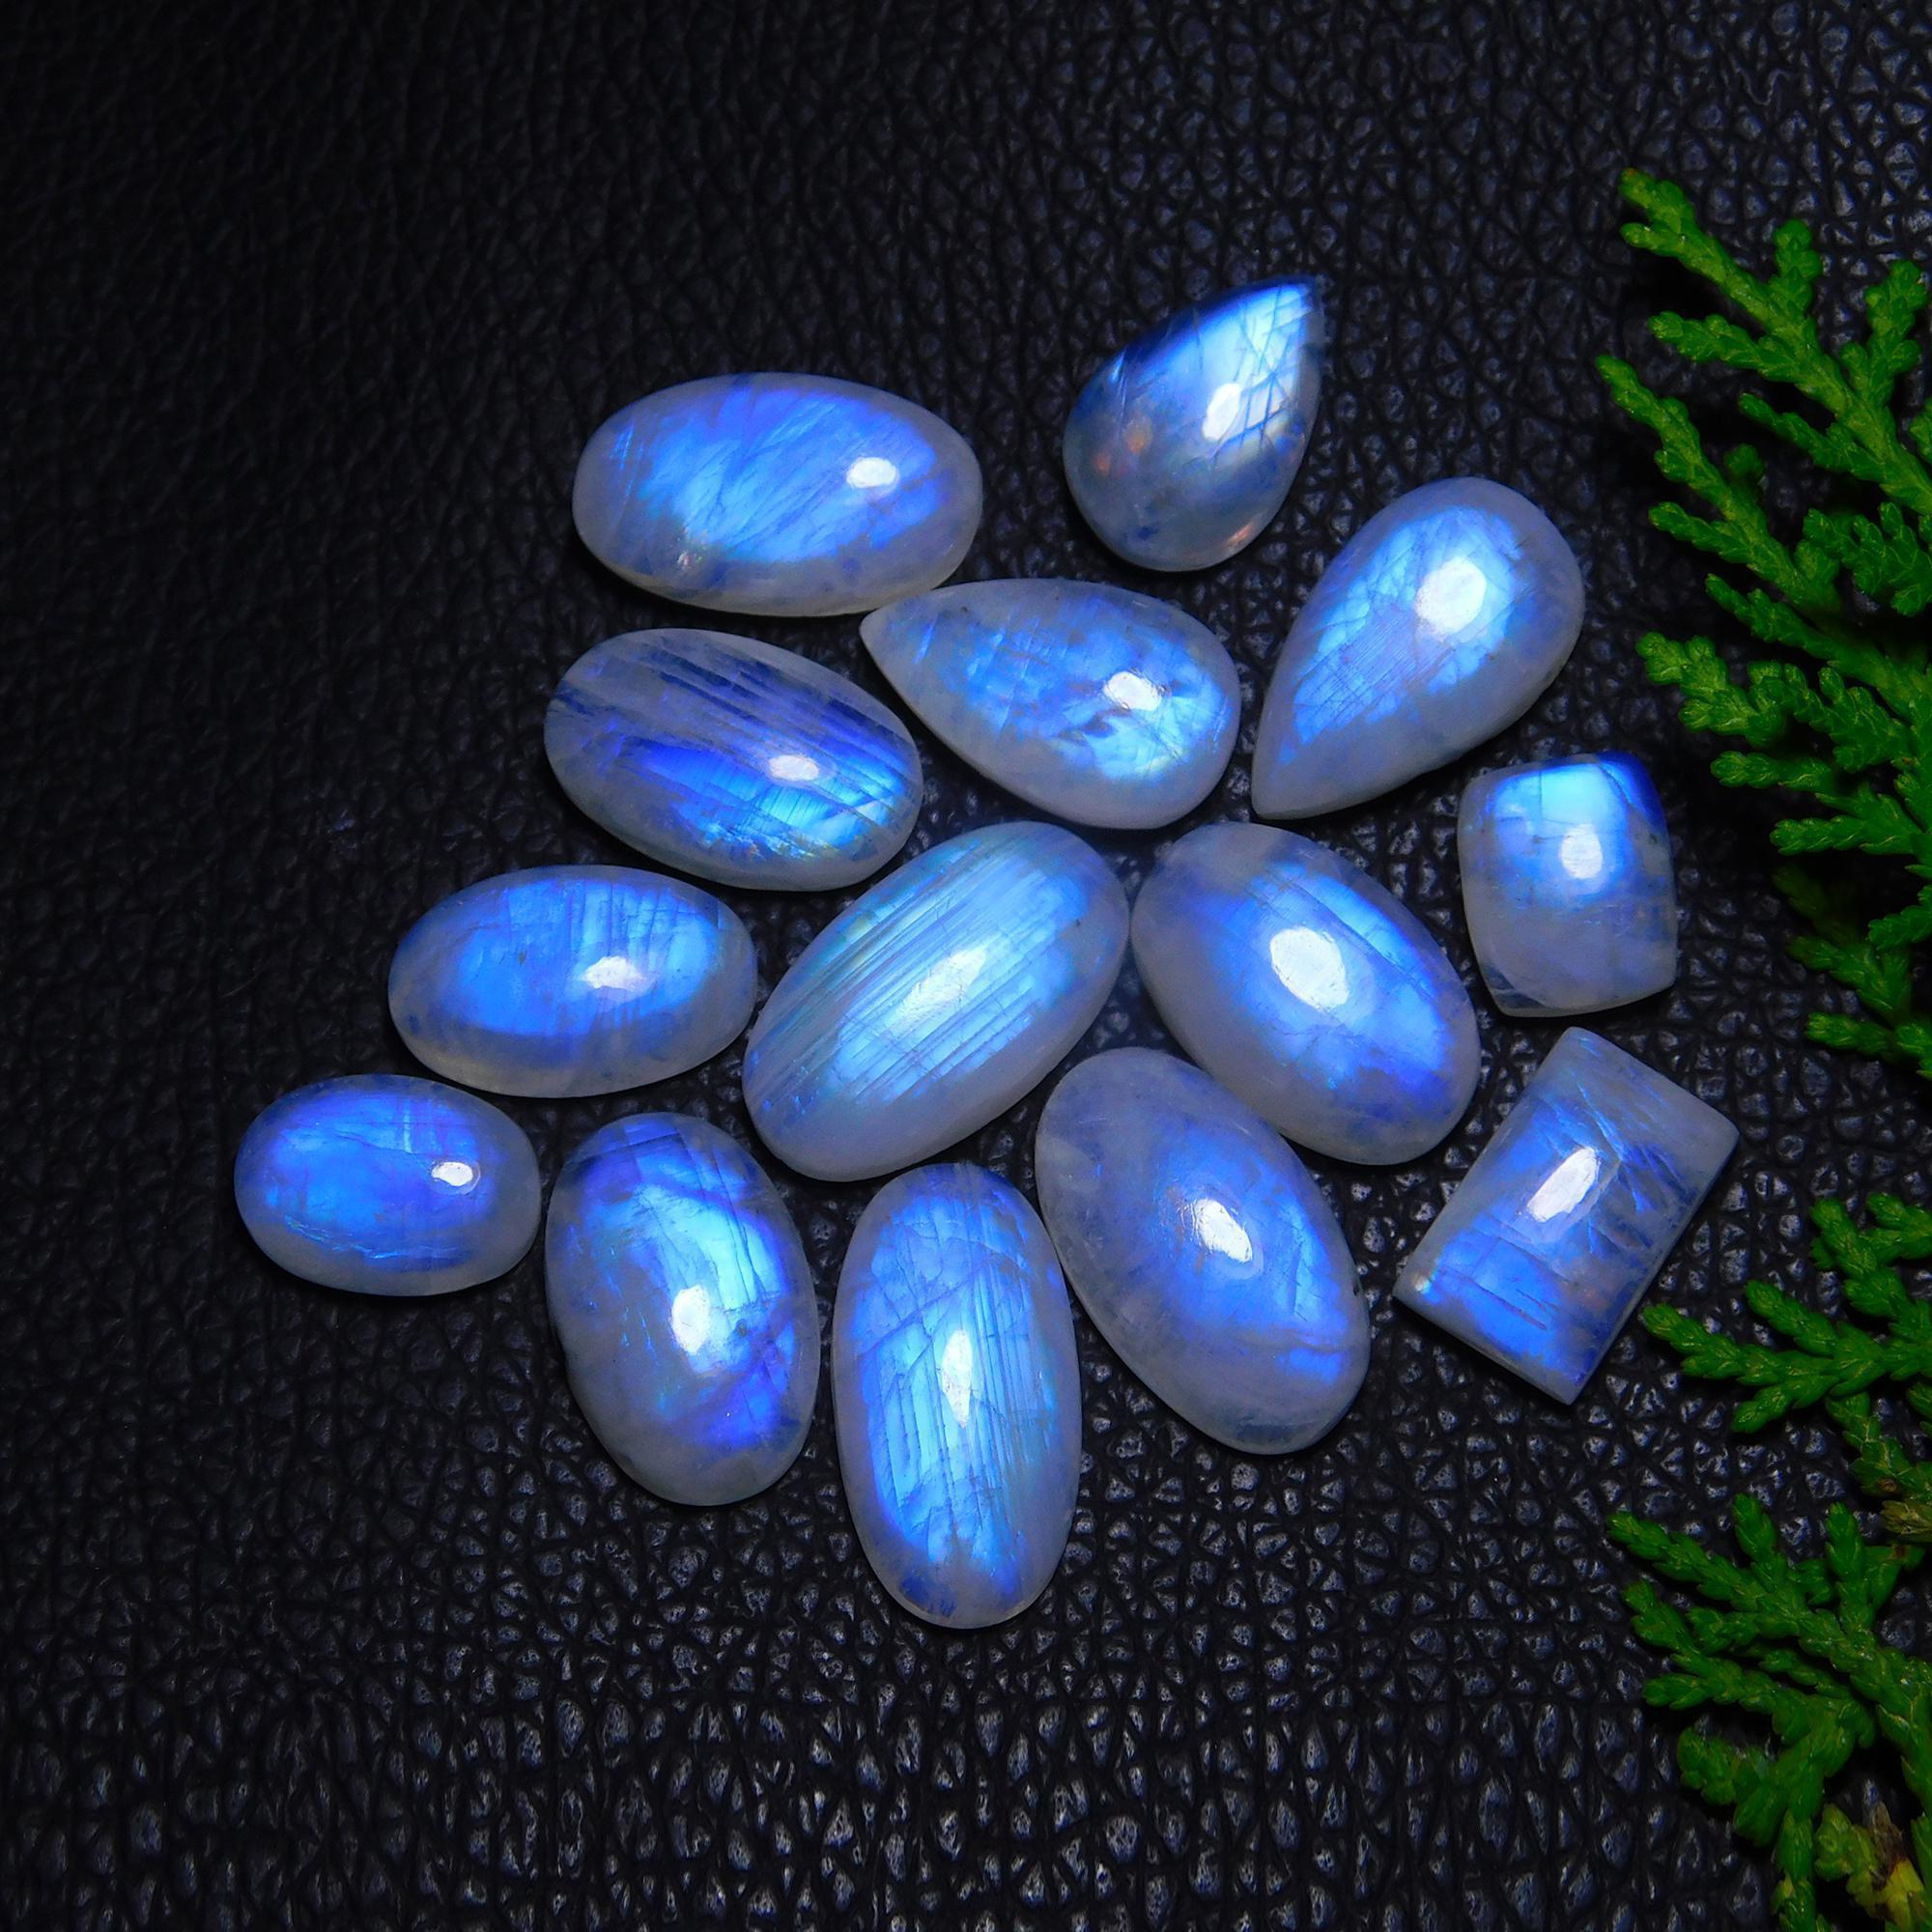 14Pcs 136Cts Natural Rainbow Moonstone Cabochon Blue Fire Loose Gemstone Crystal jewelry supplies wholesale lot gift for her Black Friday 20X12 12X12mm#9414